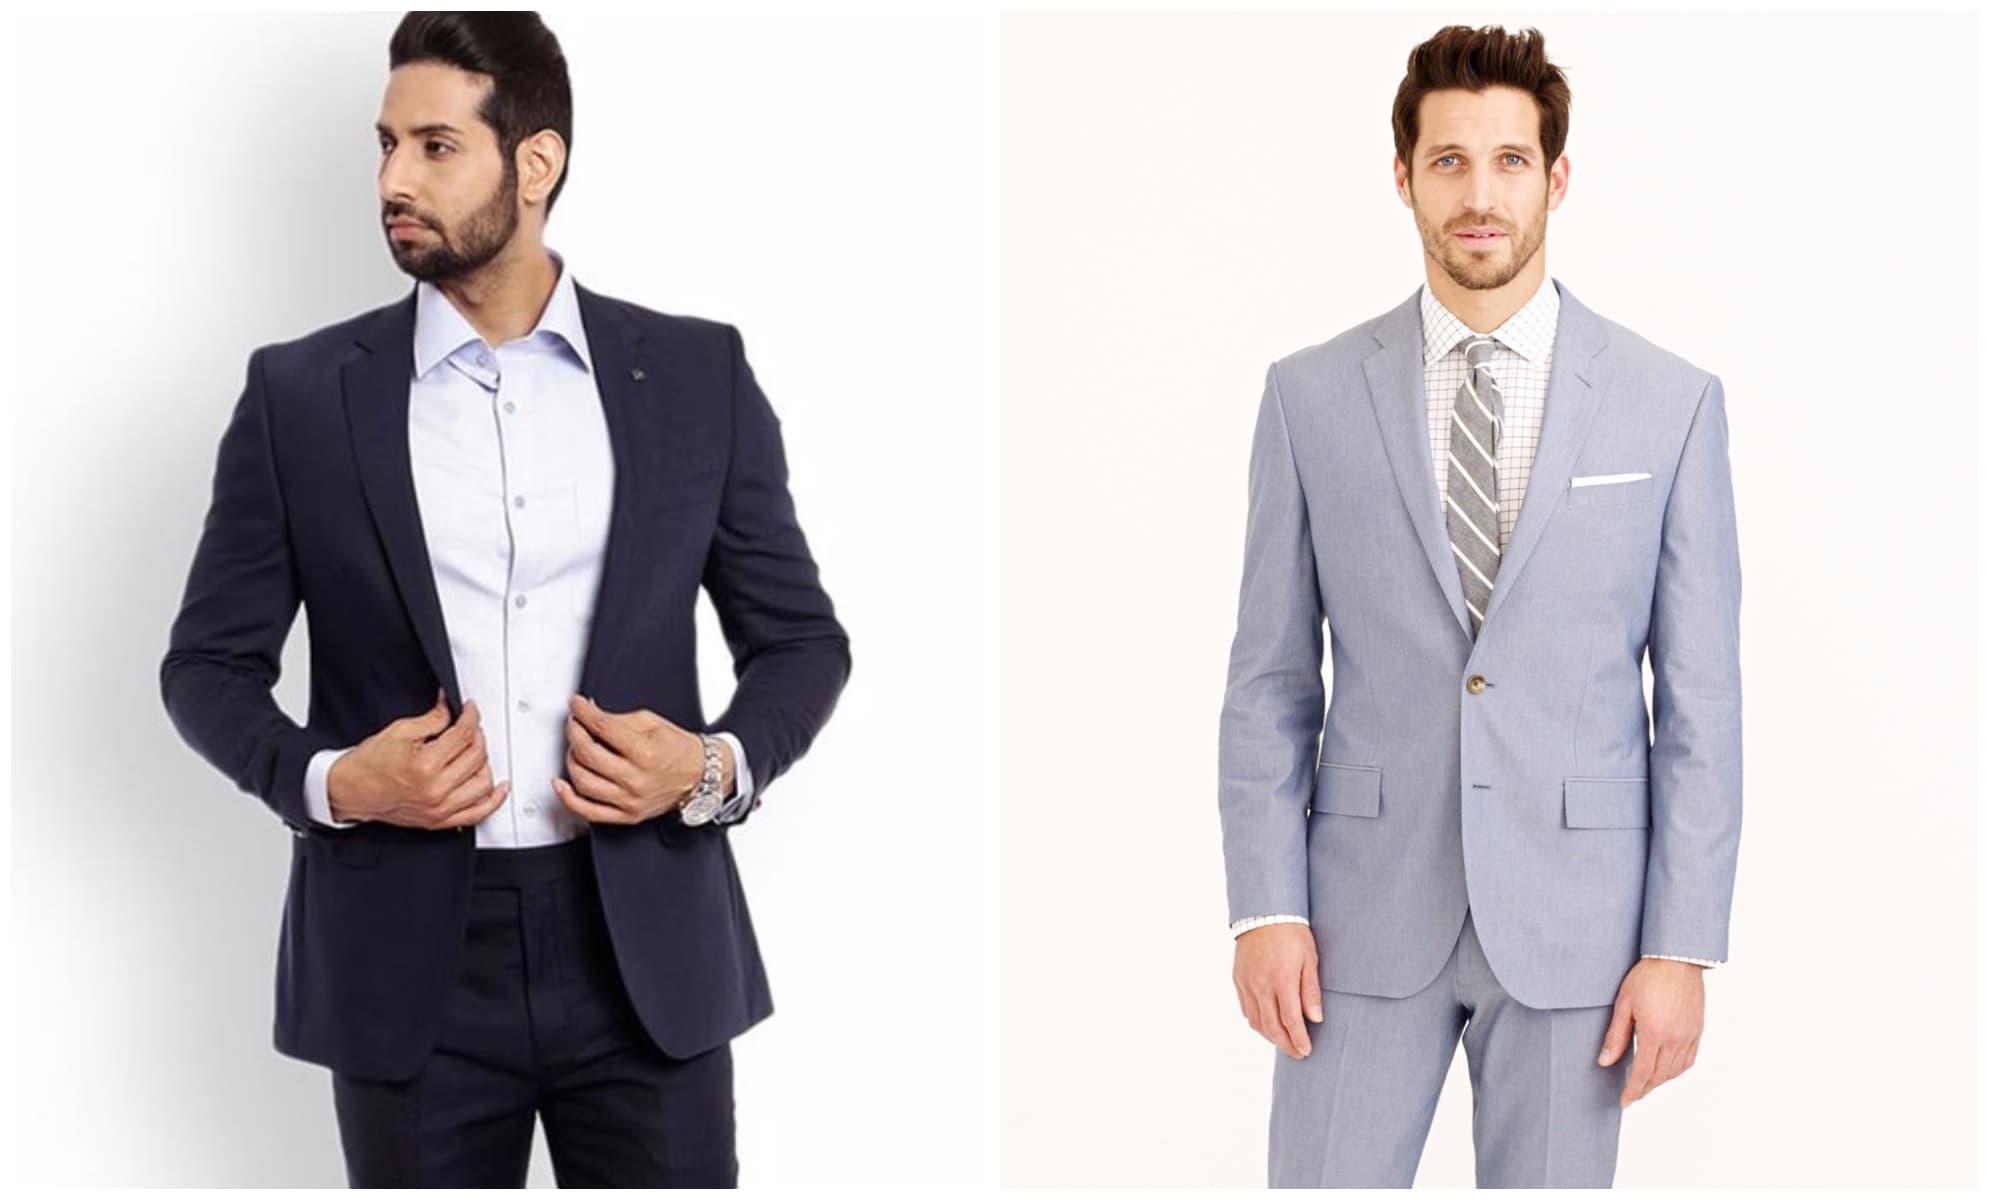 Anatomy of a Well-Cut Suit: 10 Different Suiting Styles